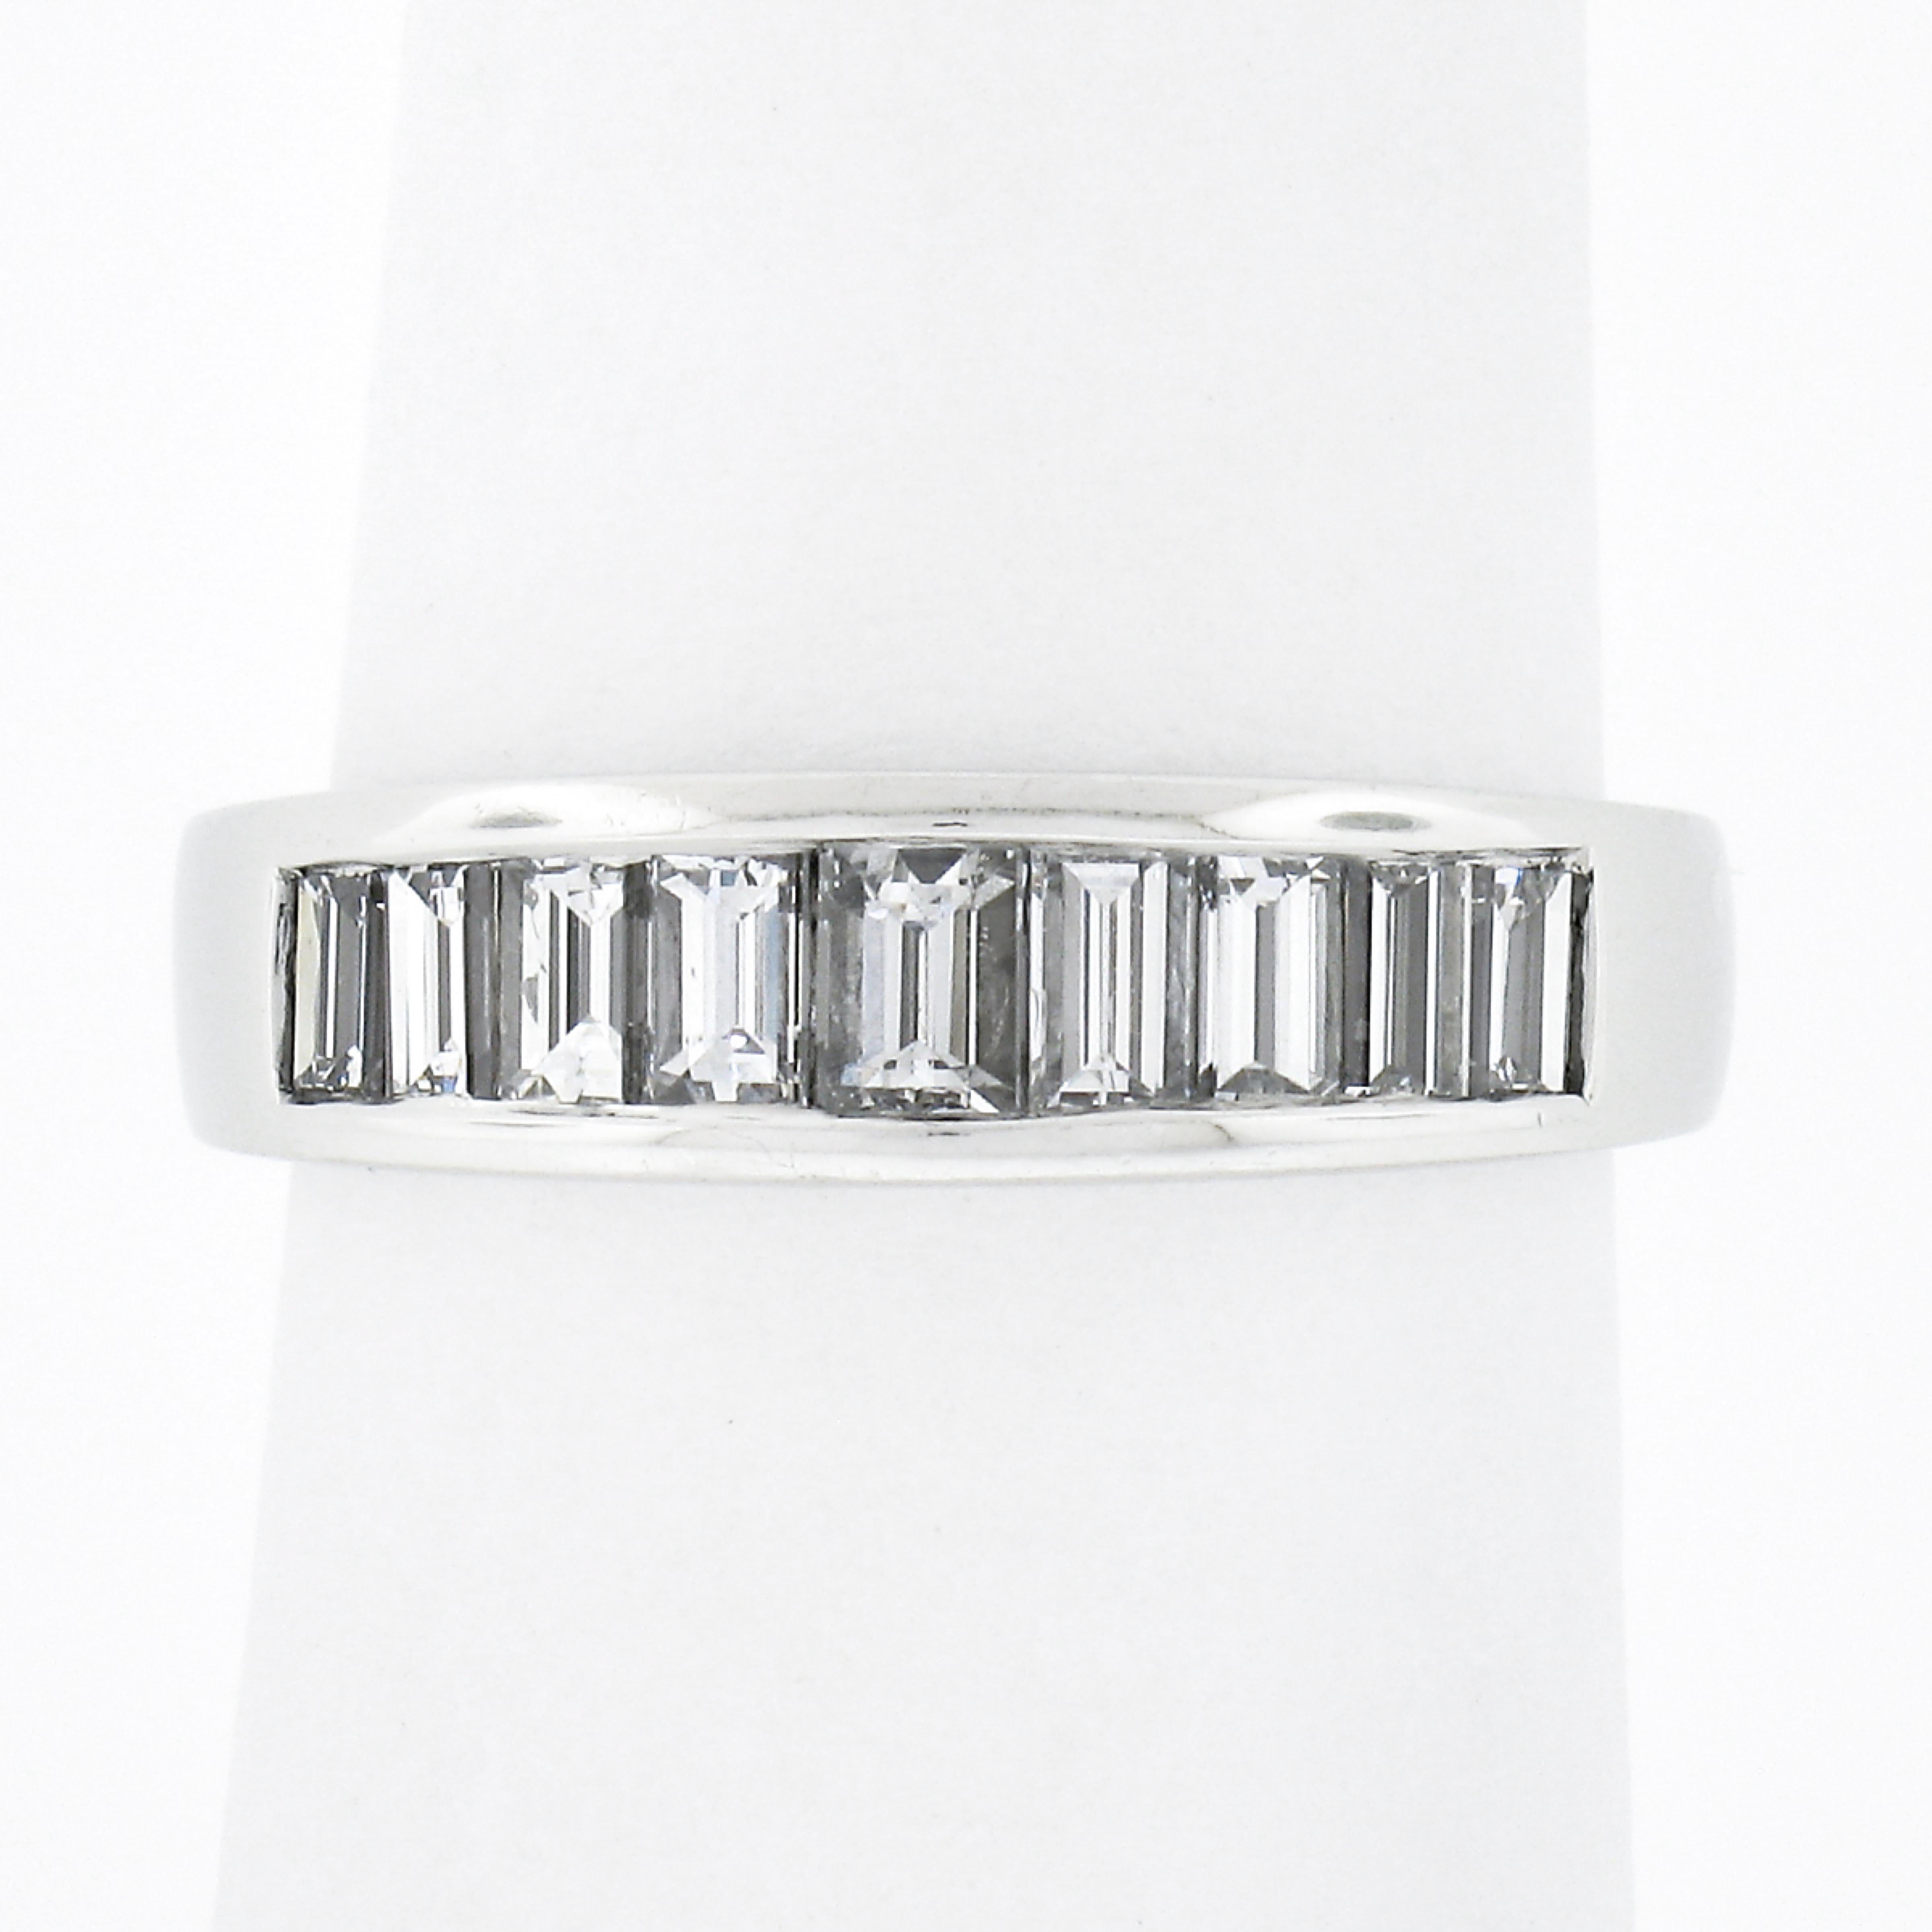 This stunning band ring is crafted in solid platinum and features 9 straight baguette cut diamonds neatly channel set across its top. The diamonds total exactly 1.02 carats and are incredibly brilliant with spectacular amount sparkle and shine that